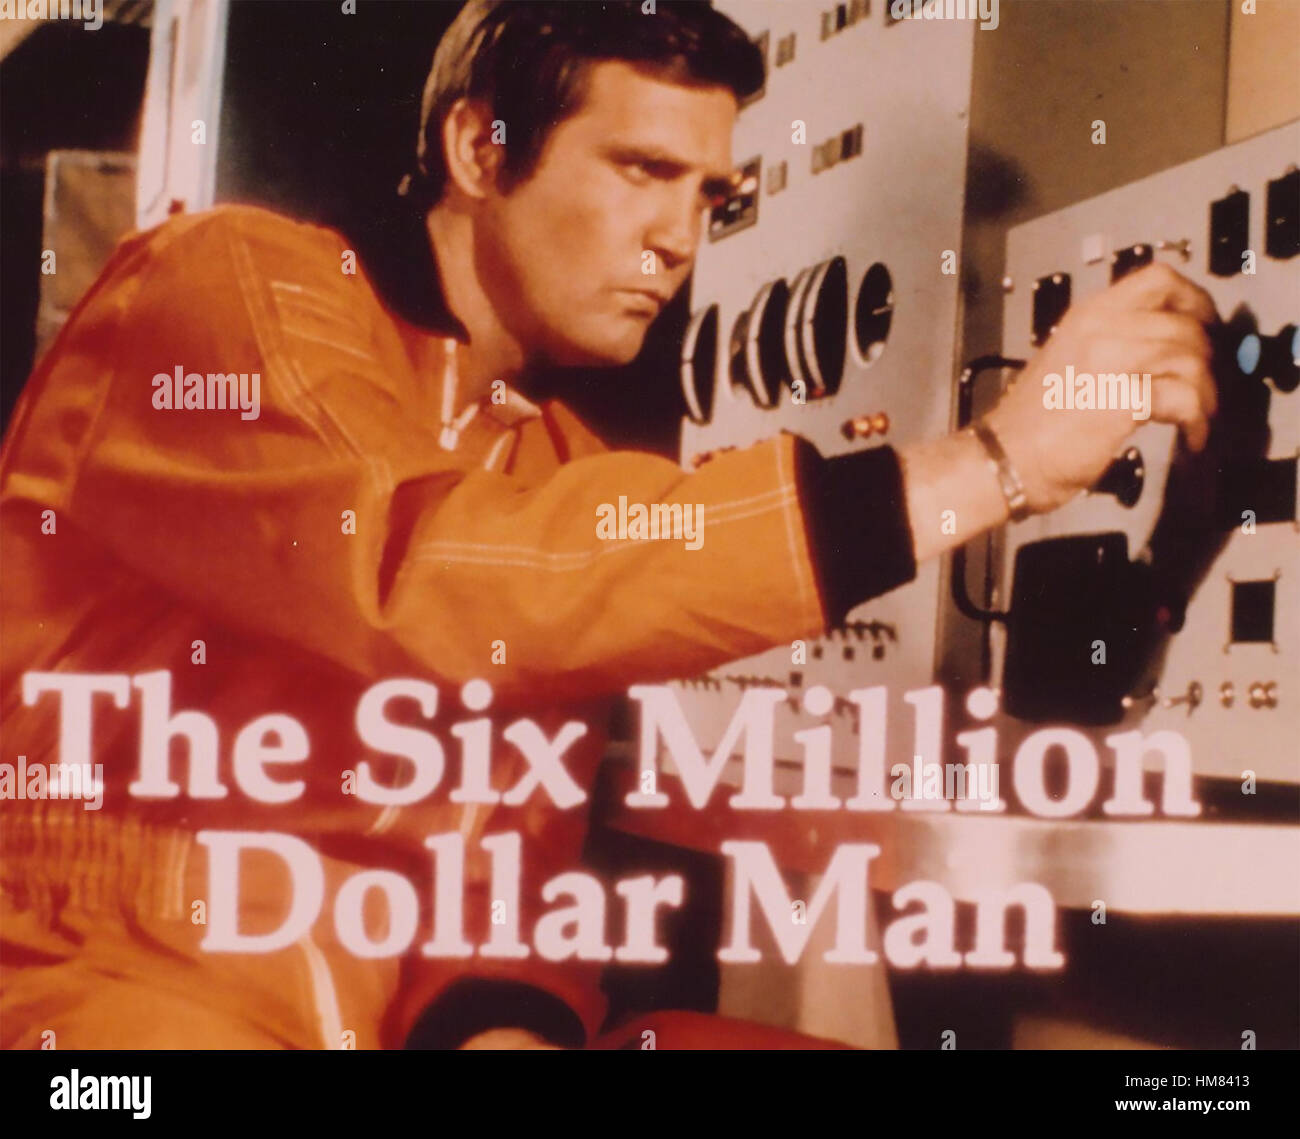 THE SIX MILLION DOLLAR MAN  ABC/Universal TV series with Lee Majors. Opening title of the 1974-1978 production. Stock Photo